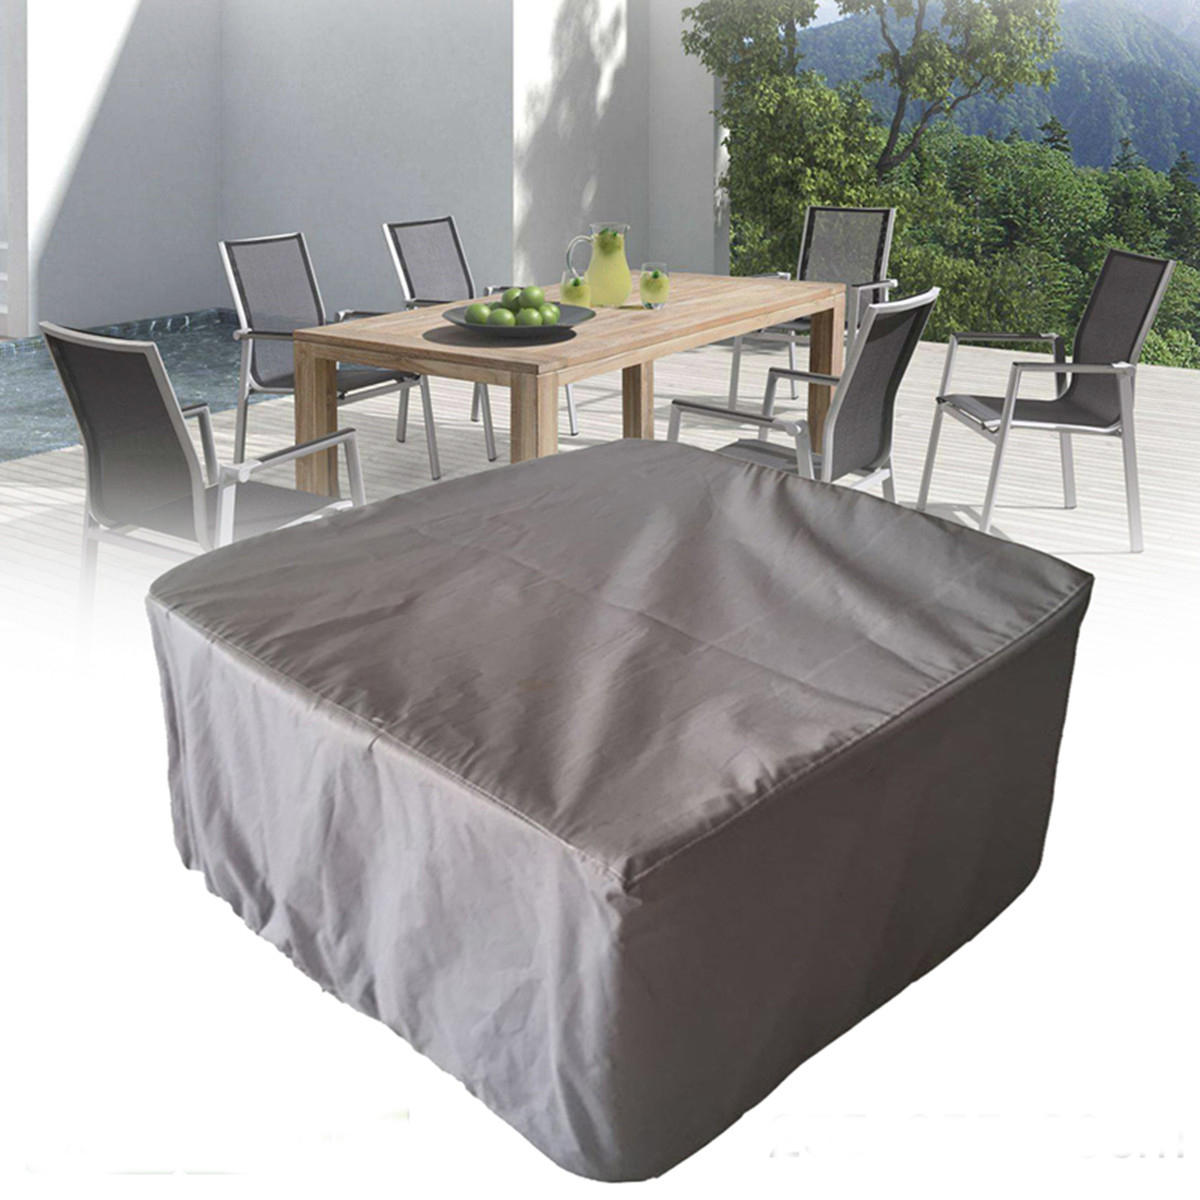 255x255x80CM Garden Yard Patio Table Waterproof Cover Outdoor Furniture Dust Shelter Protection